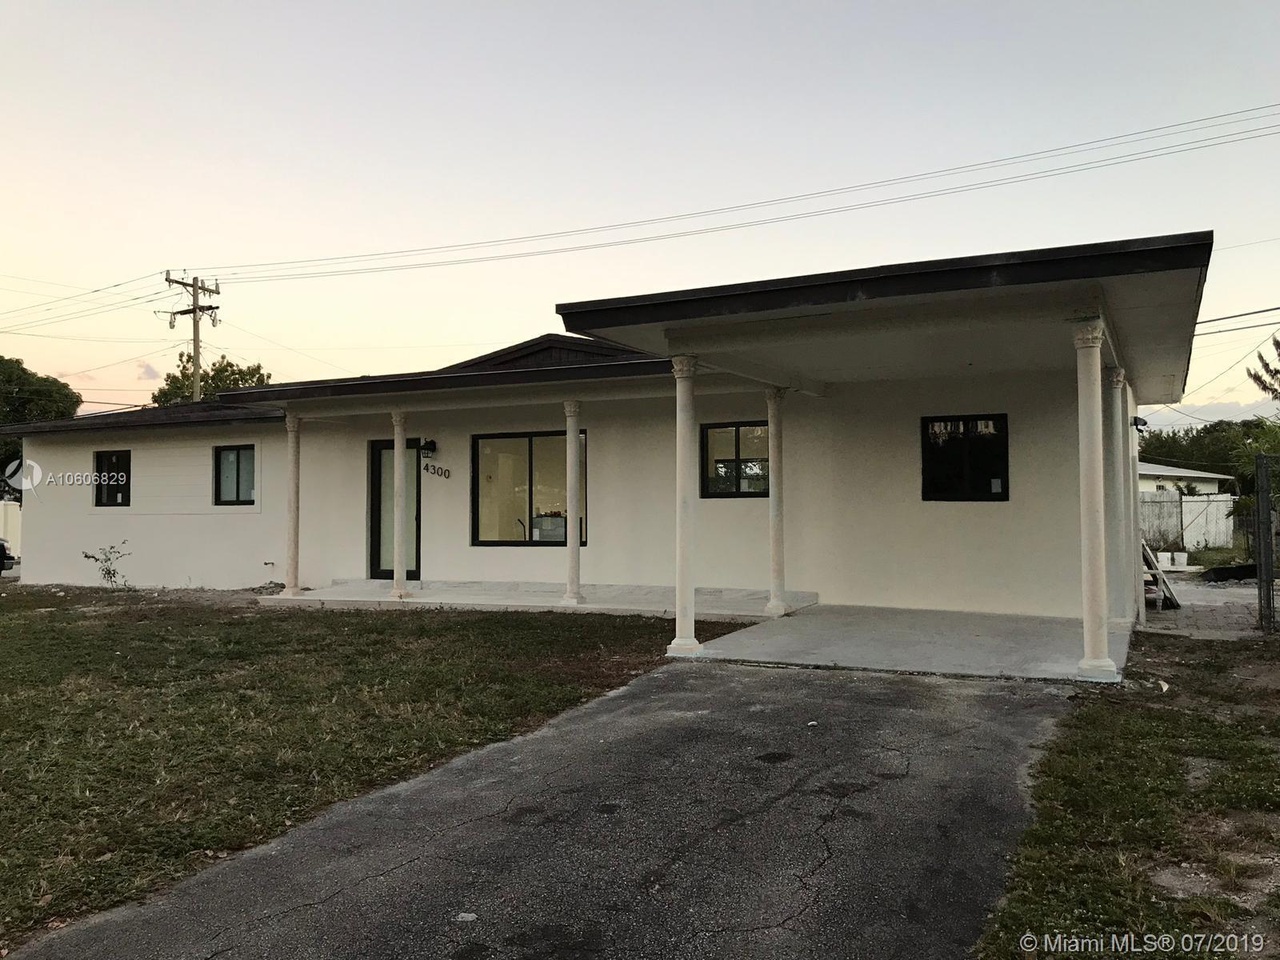 4300 NW 173rd Dr, Miami Gardens, FL 33055 | MLS# A10606829 | Redfin